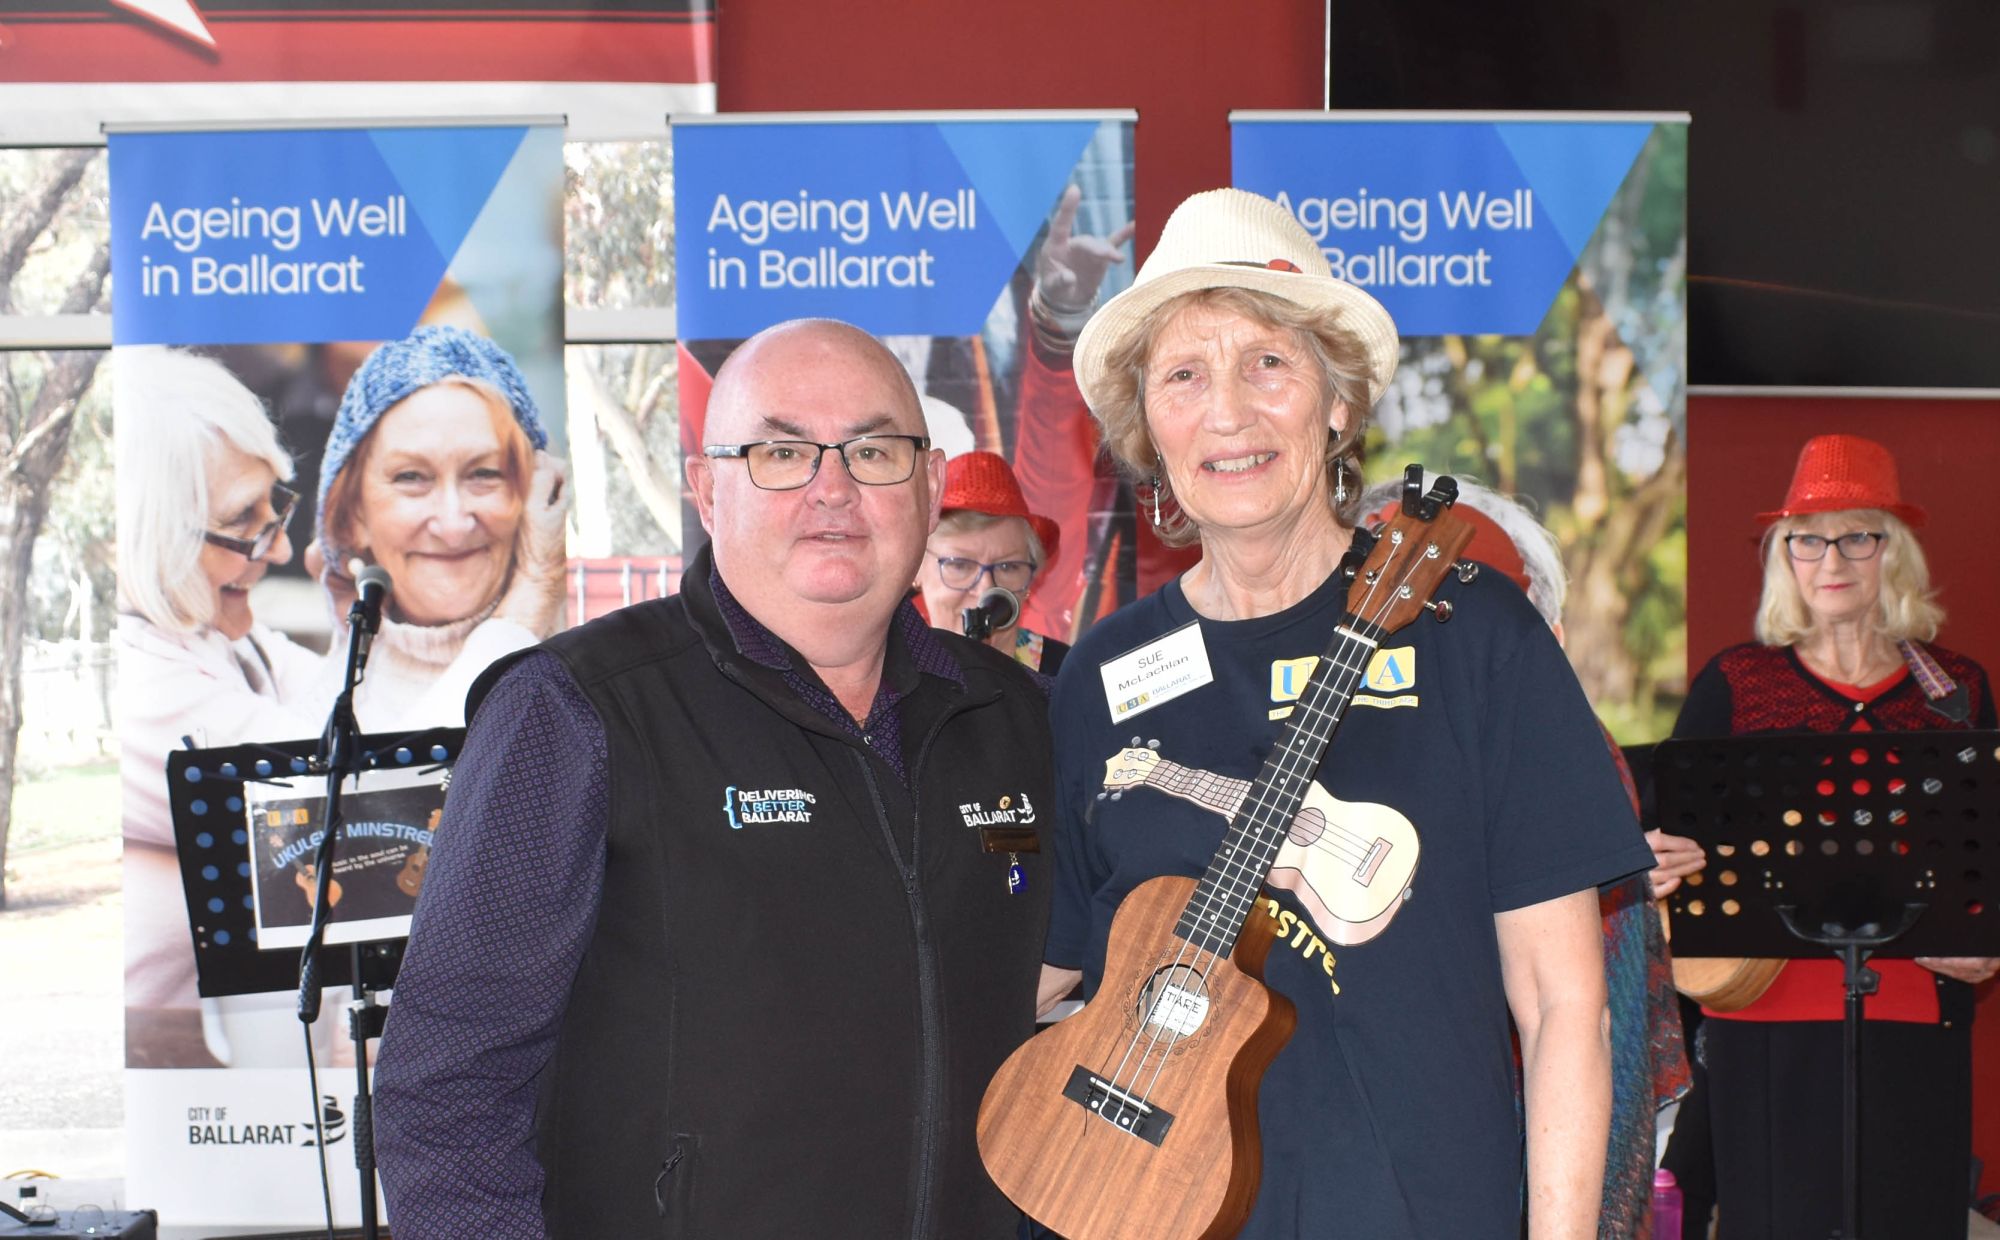 City of Ballarat Mayor, Cr Des Hudson with Sue McLachlan from U3A at the Seniors Festival launch.